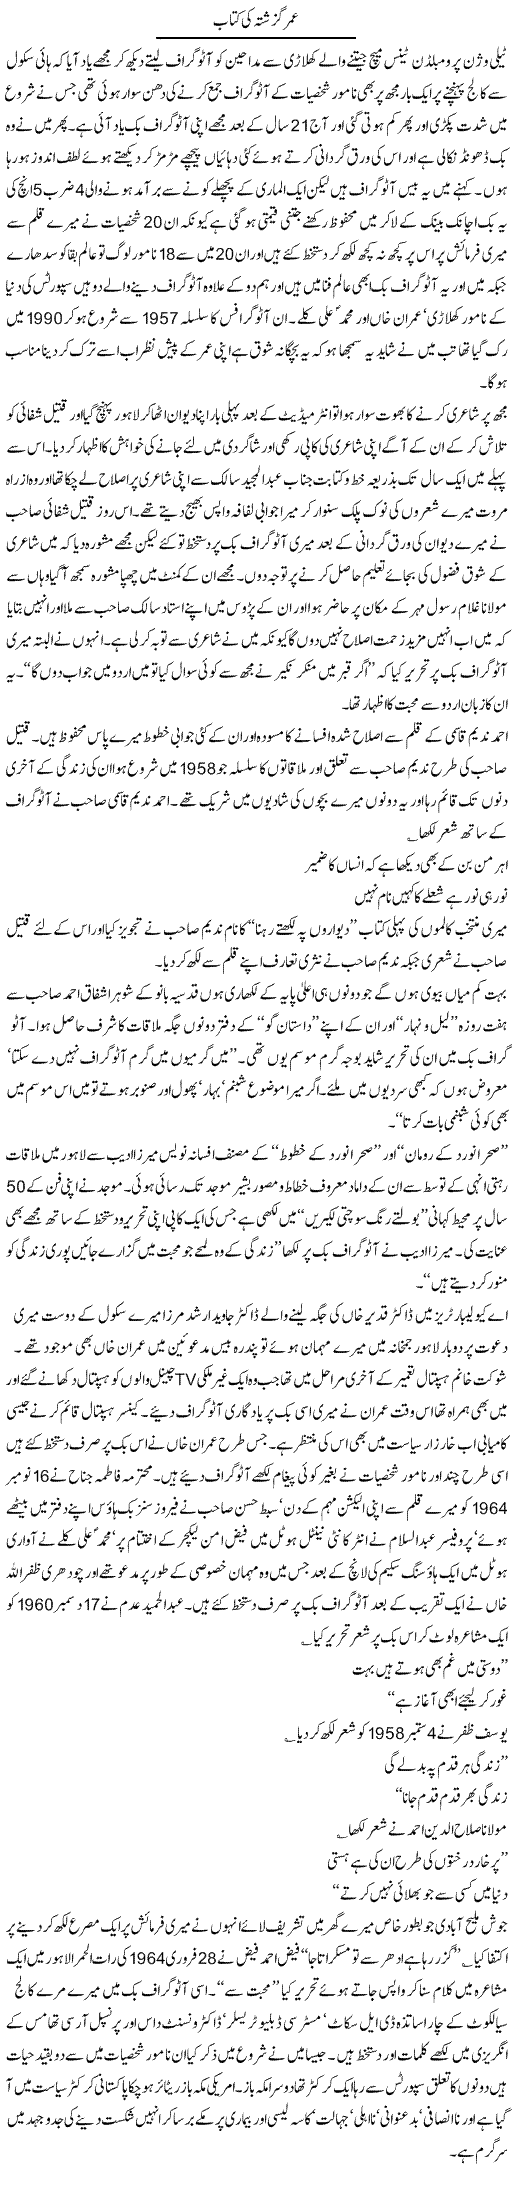 Book of My Life Express Column Hameed Ahmed 28 January 2011